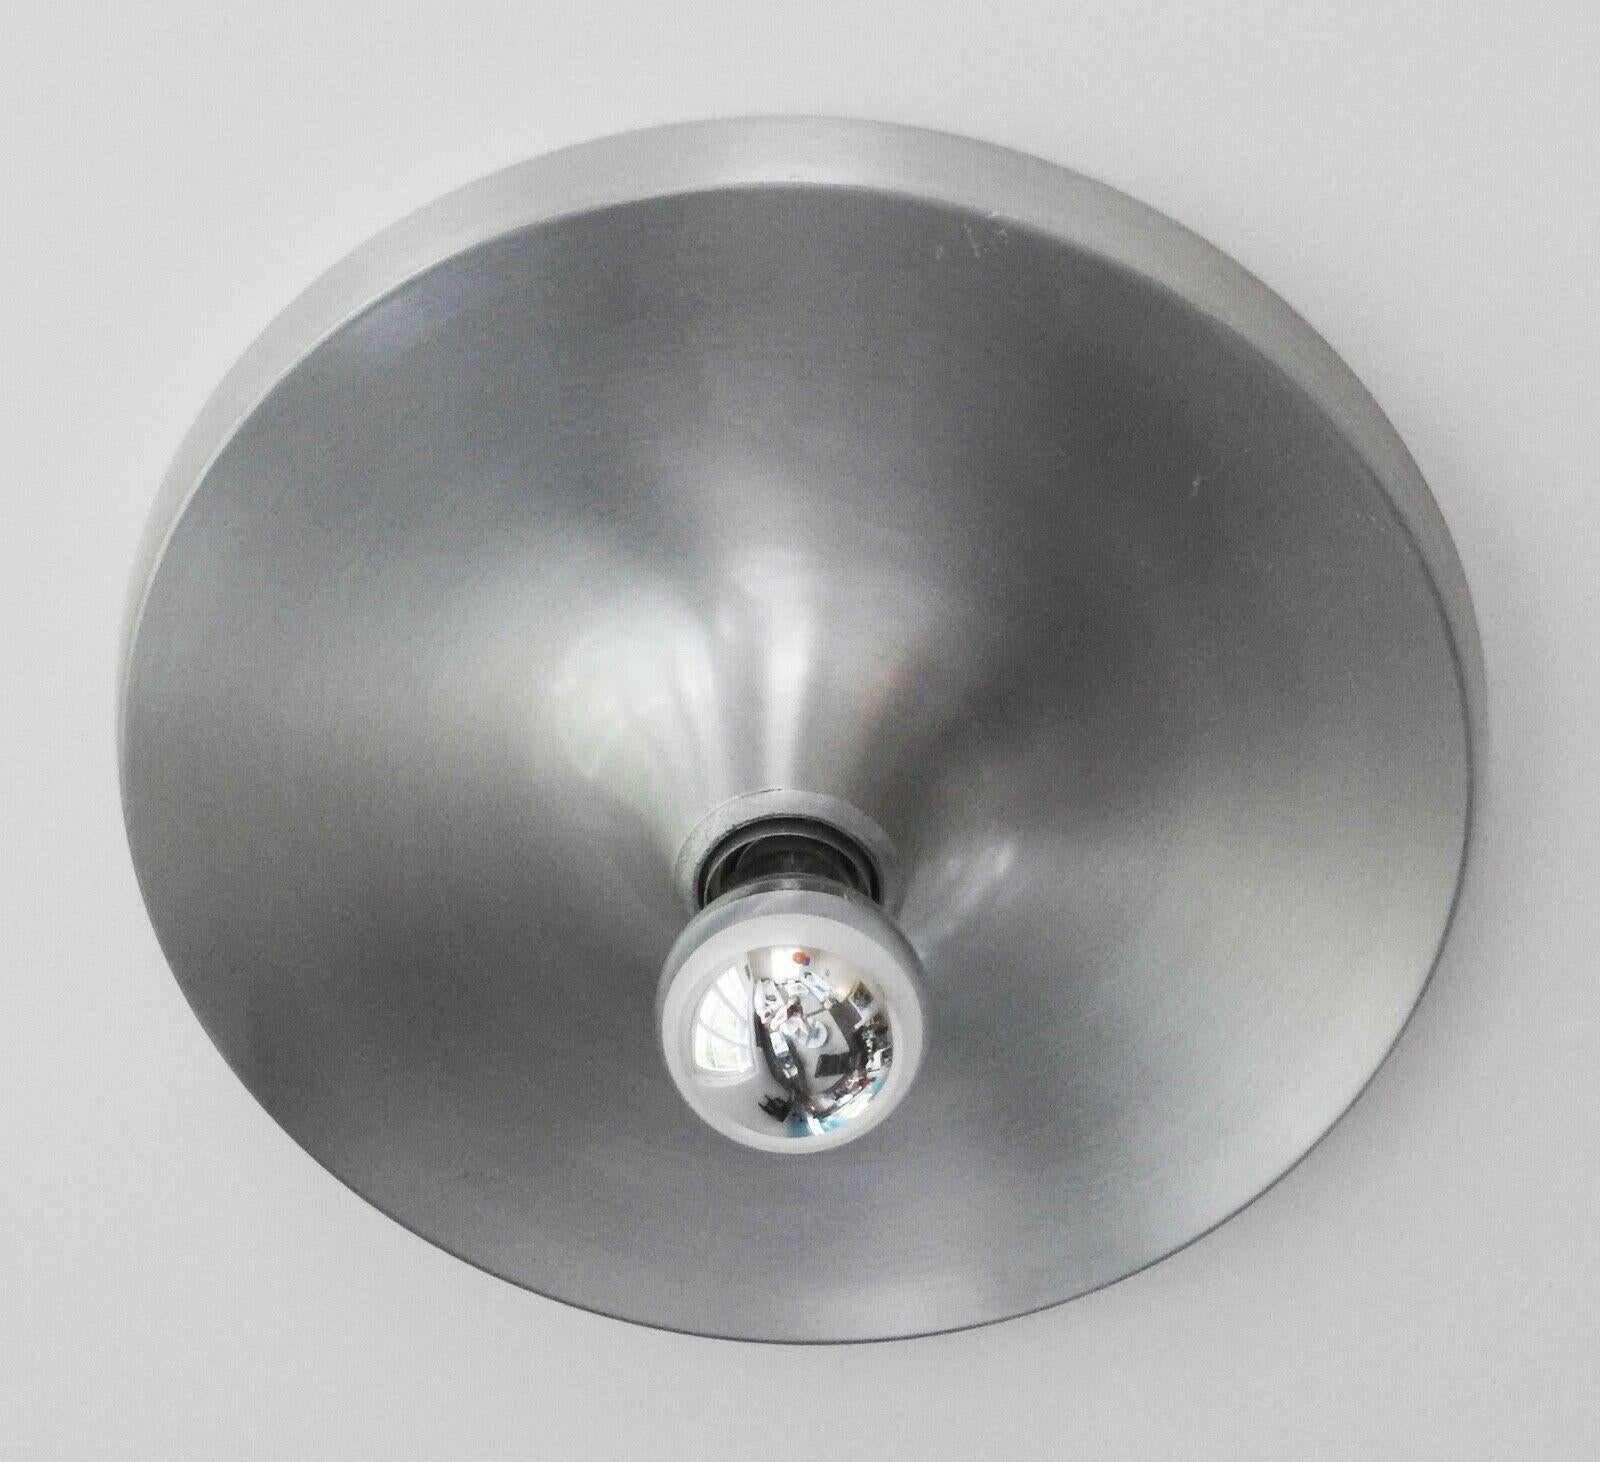 Wand lamp/ceiling lamp from Charlotte Perriand for ski resort les Arcs (France)
1960-1970
Brushed aluminum 33/34 cm
Good condition works /
Use mirror bulb/ no bulb.